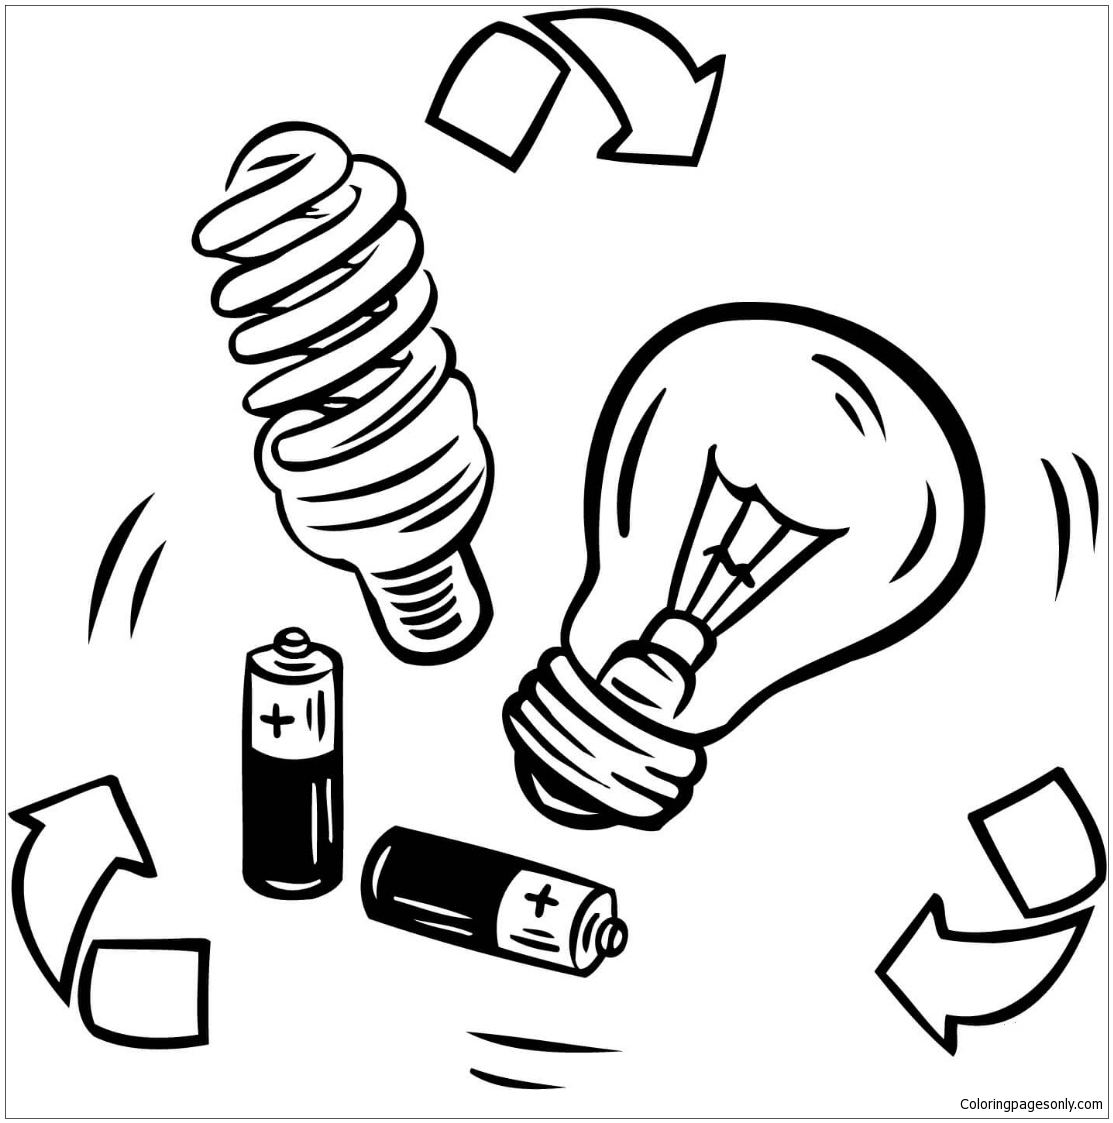 Bulb Recycling From Battery Coloring Pages - Recycling Coloring Pages